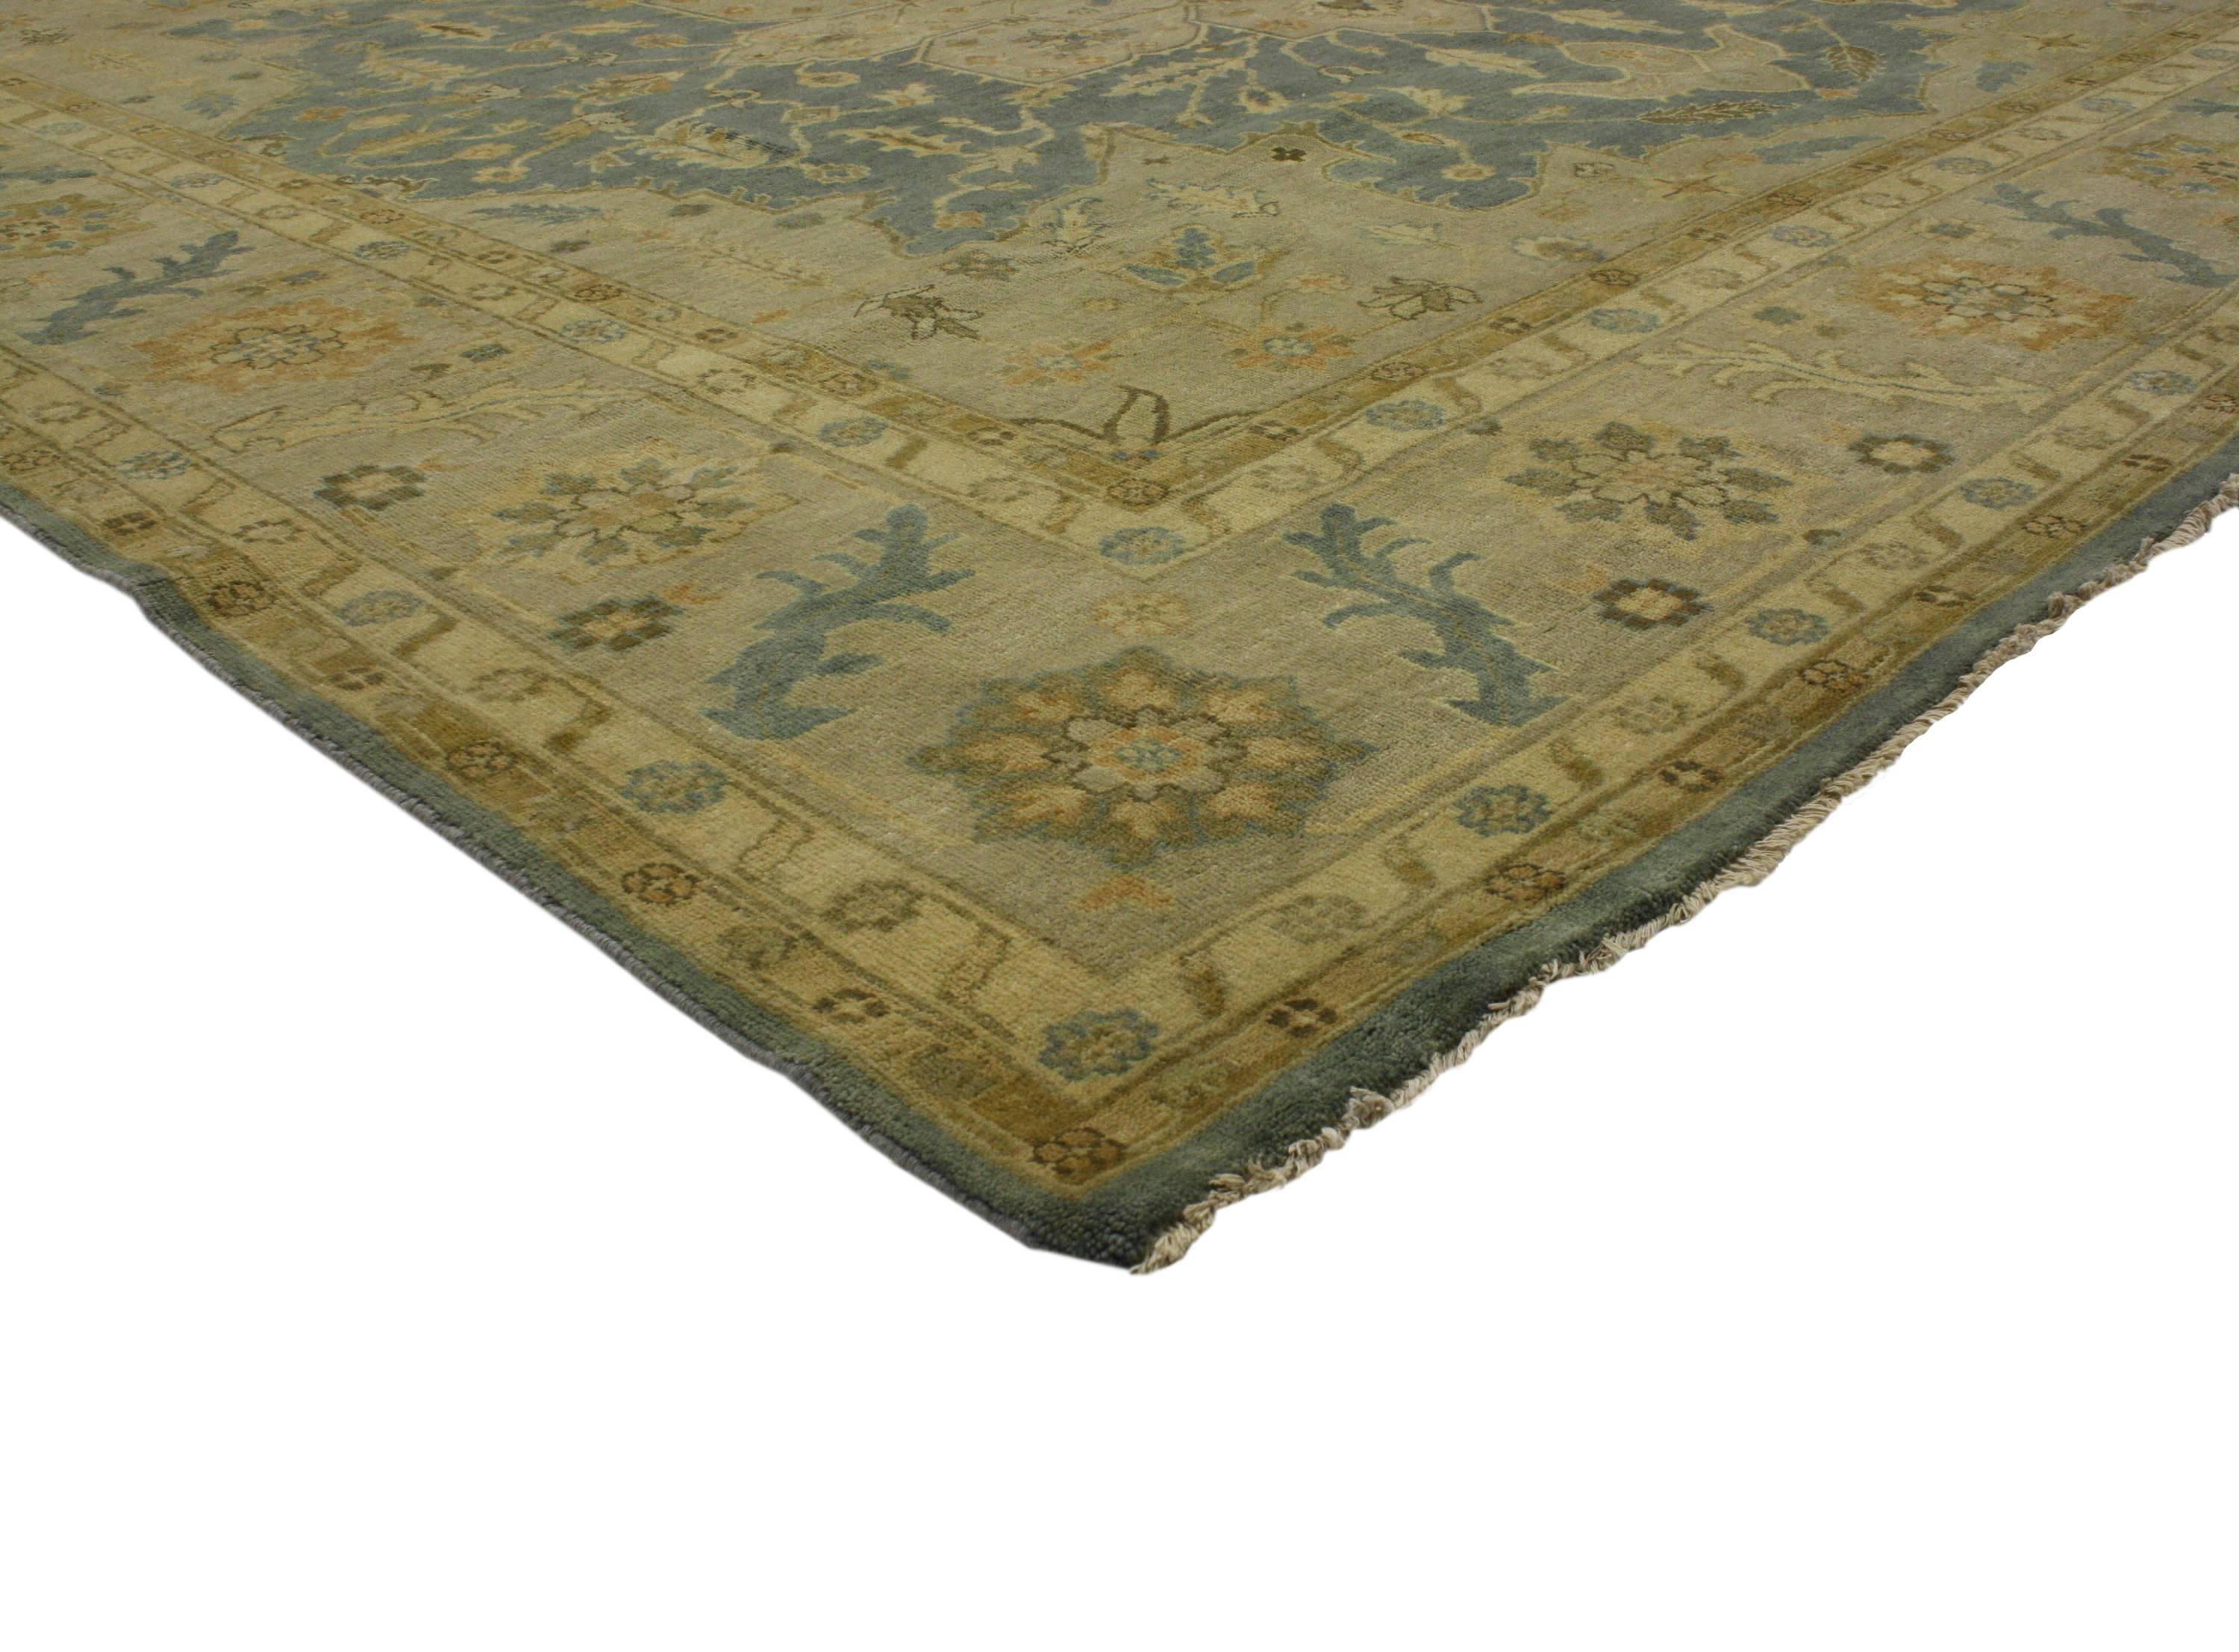 30176 Transitional Square Rug with Persian Heriz Design and Modern Style. A beautiful example of hues in harmony, this hand-knotted wool transitional square rug bears a remarkable air of chic sophistication. A central medallion and breathtaking